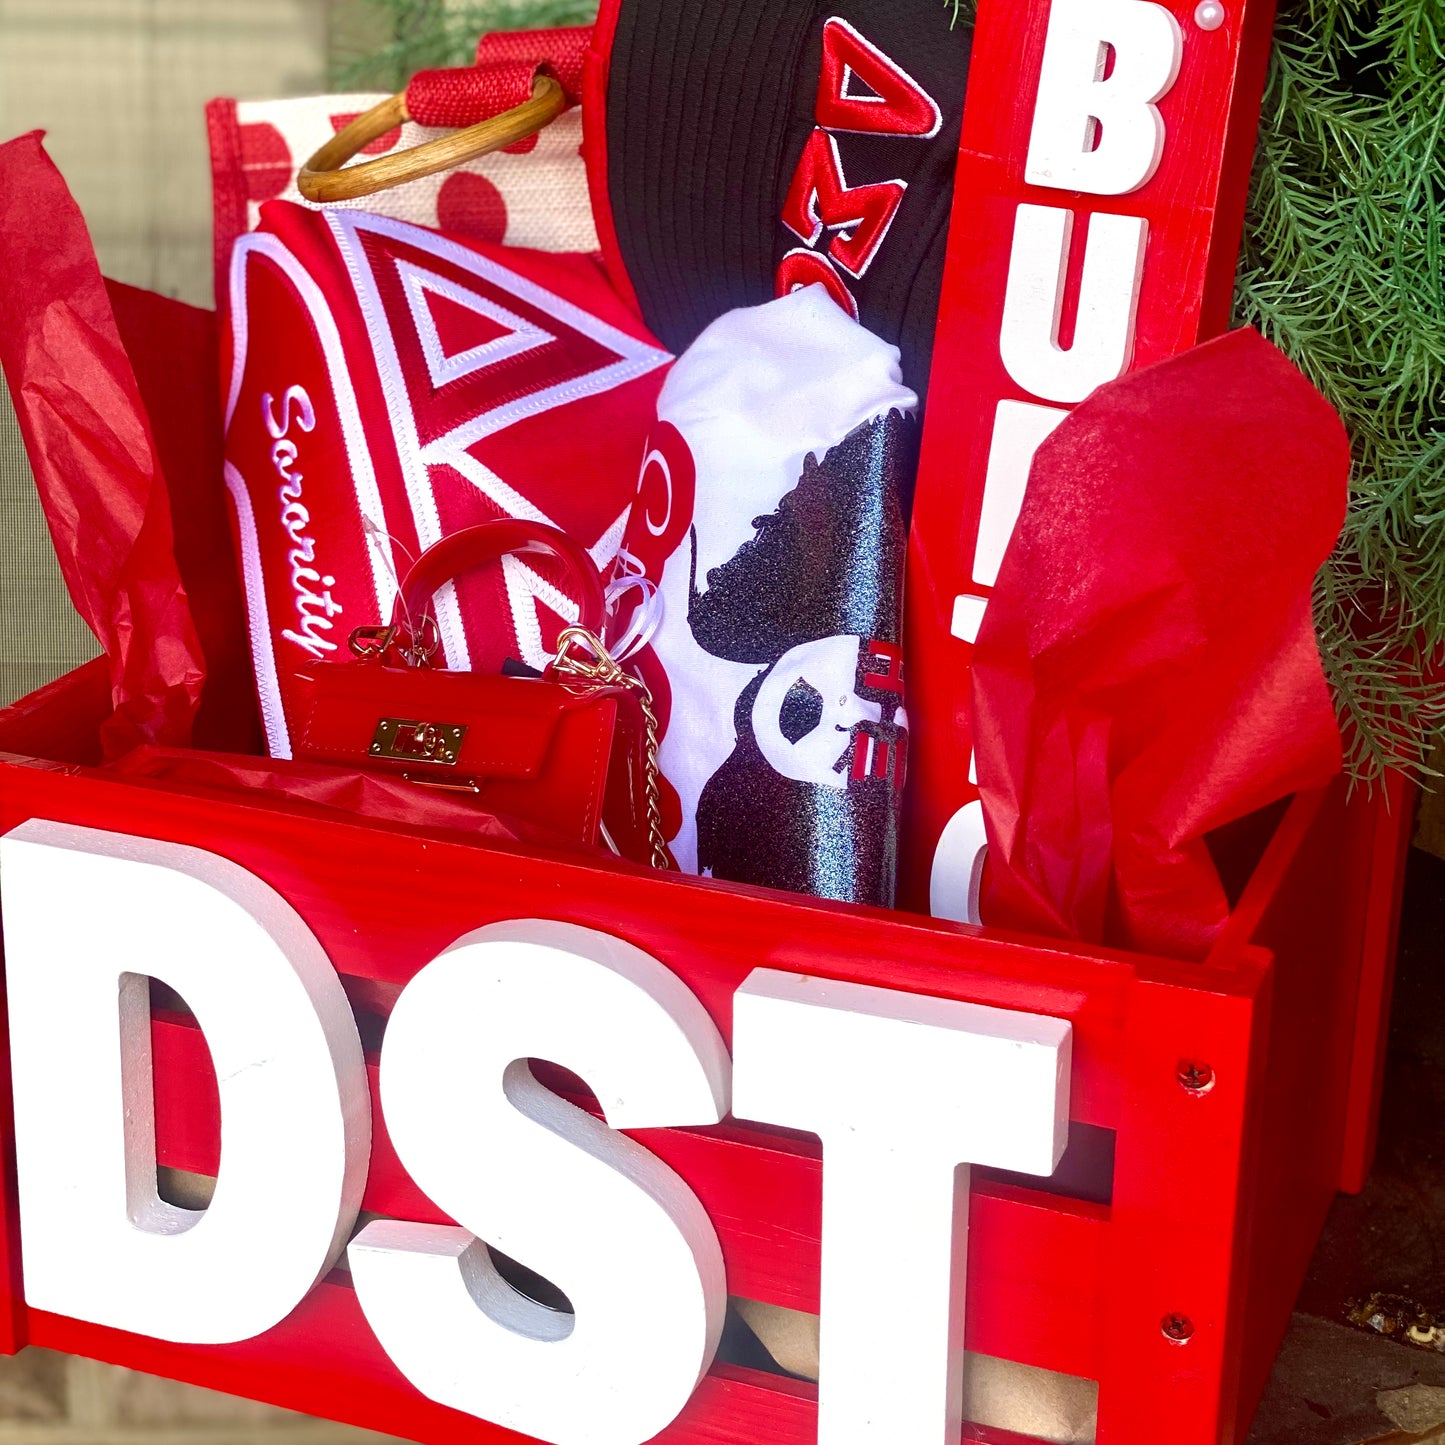 The DST Keepsake Crate | Free Shipping